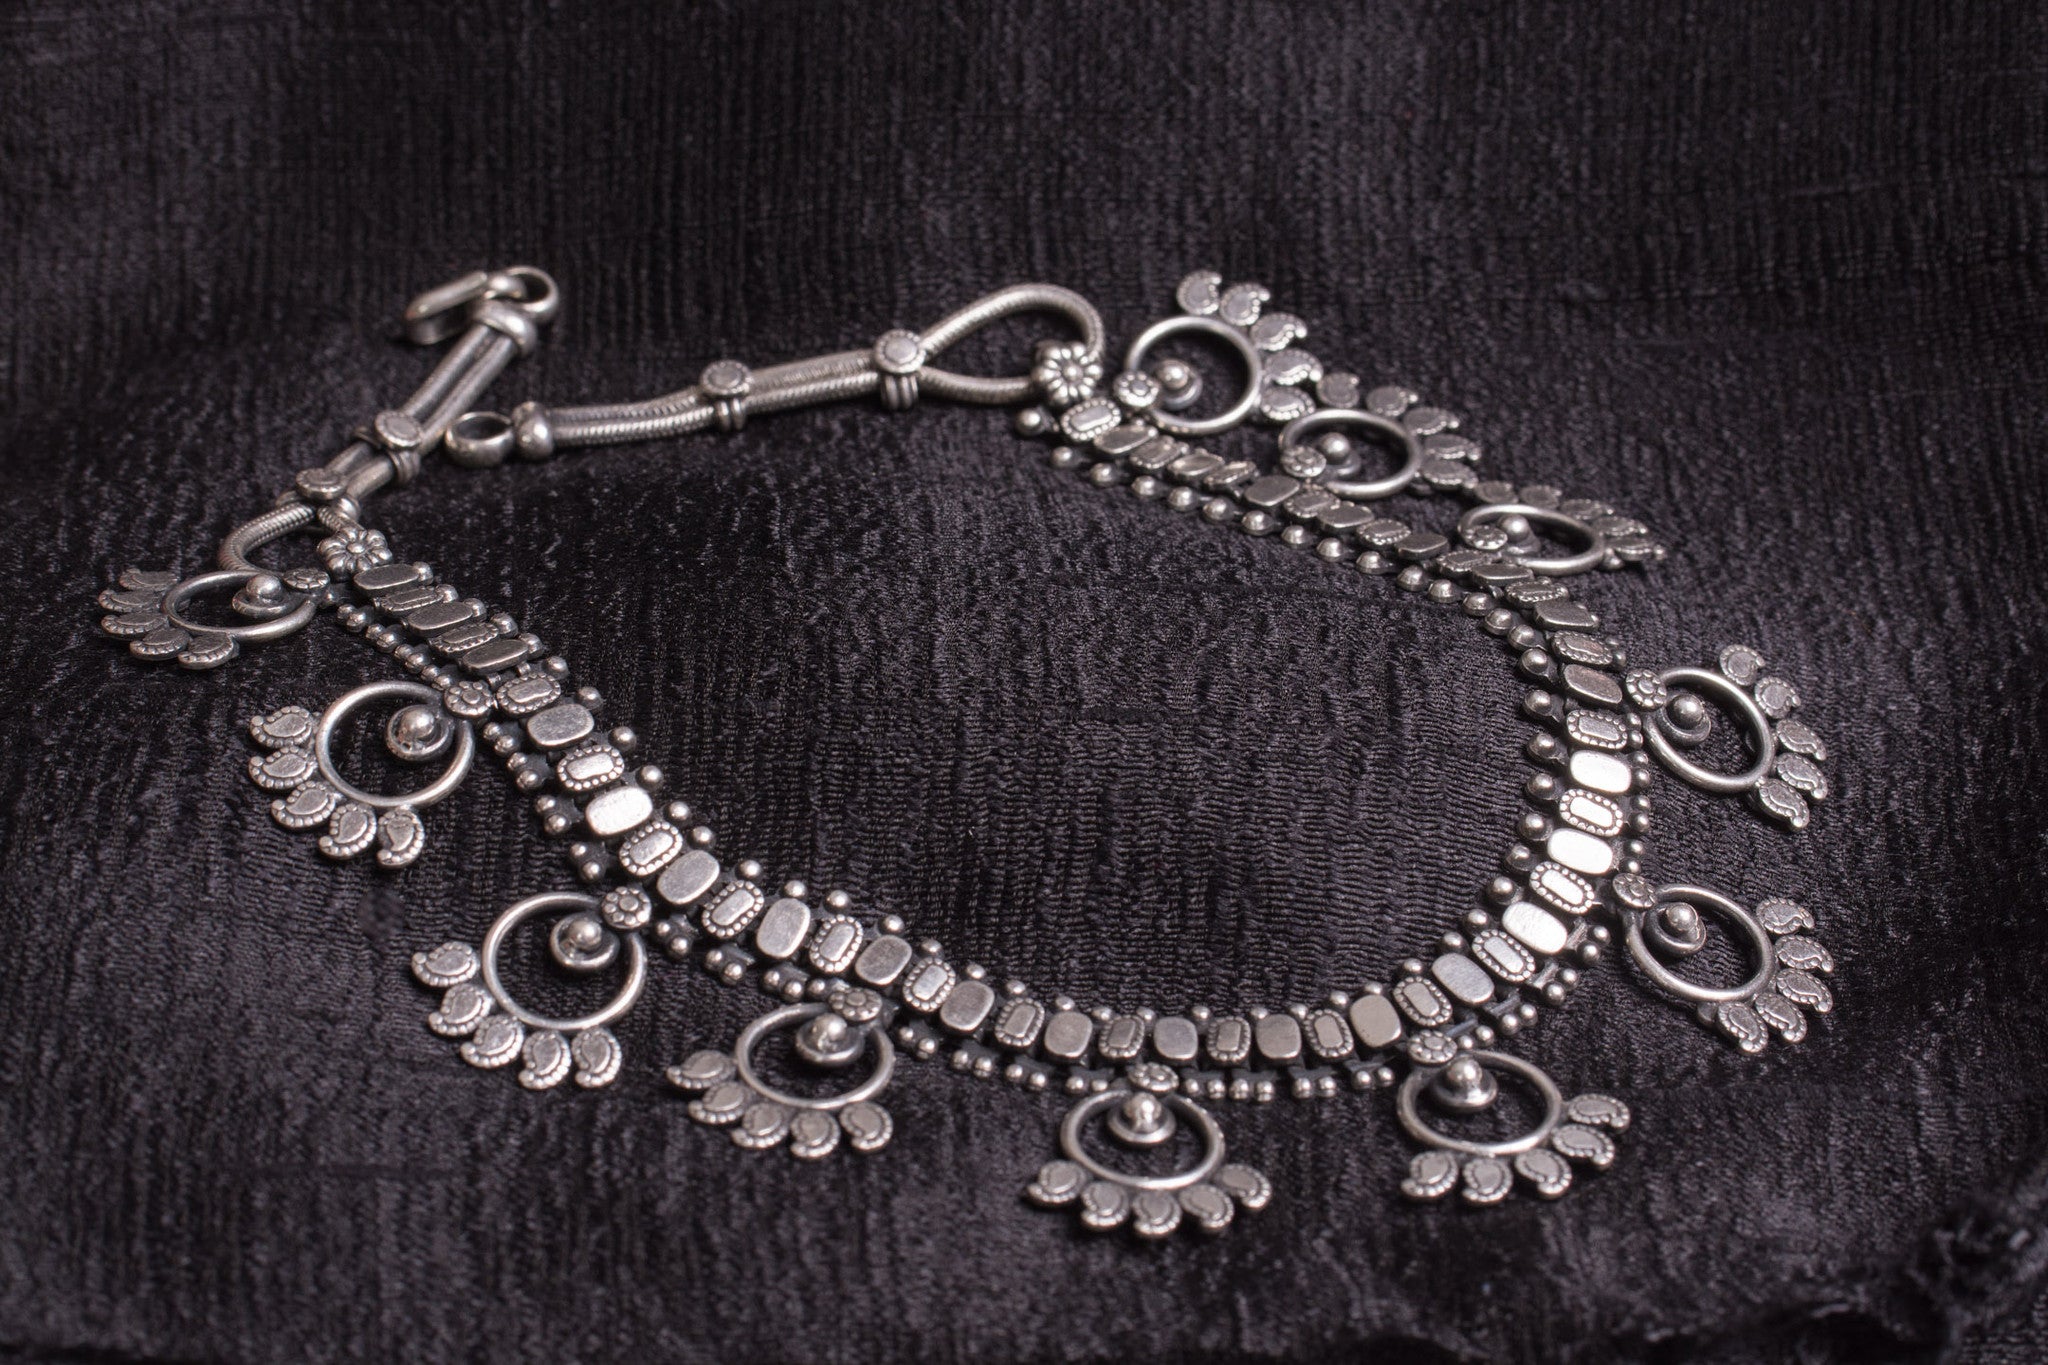 20a511-silver-amrapali-beaded-necklace-embossed-geometric-designs